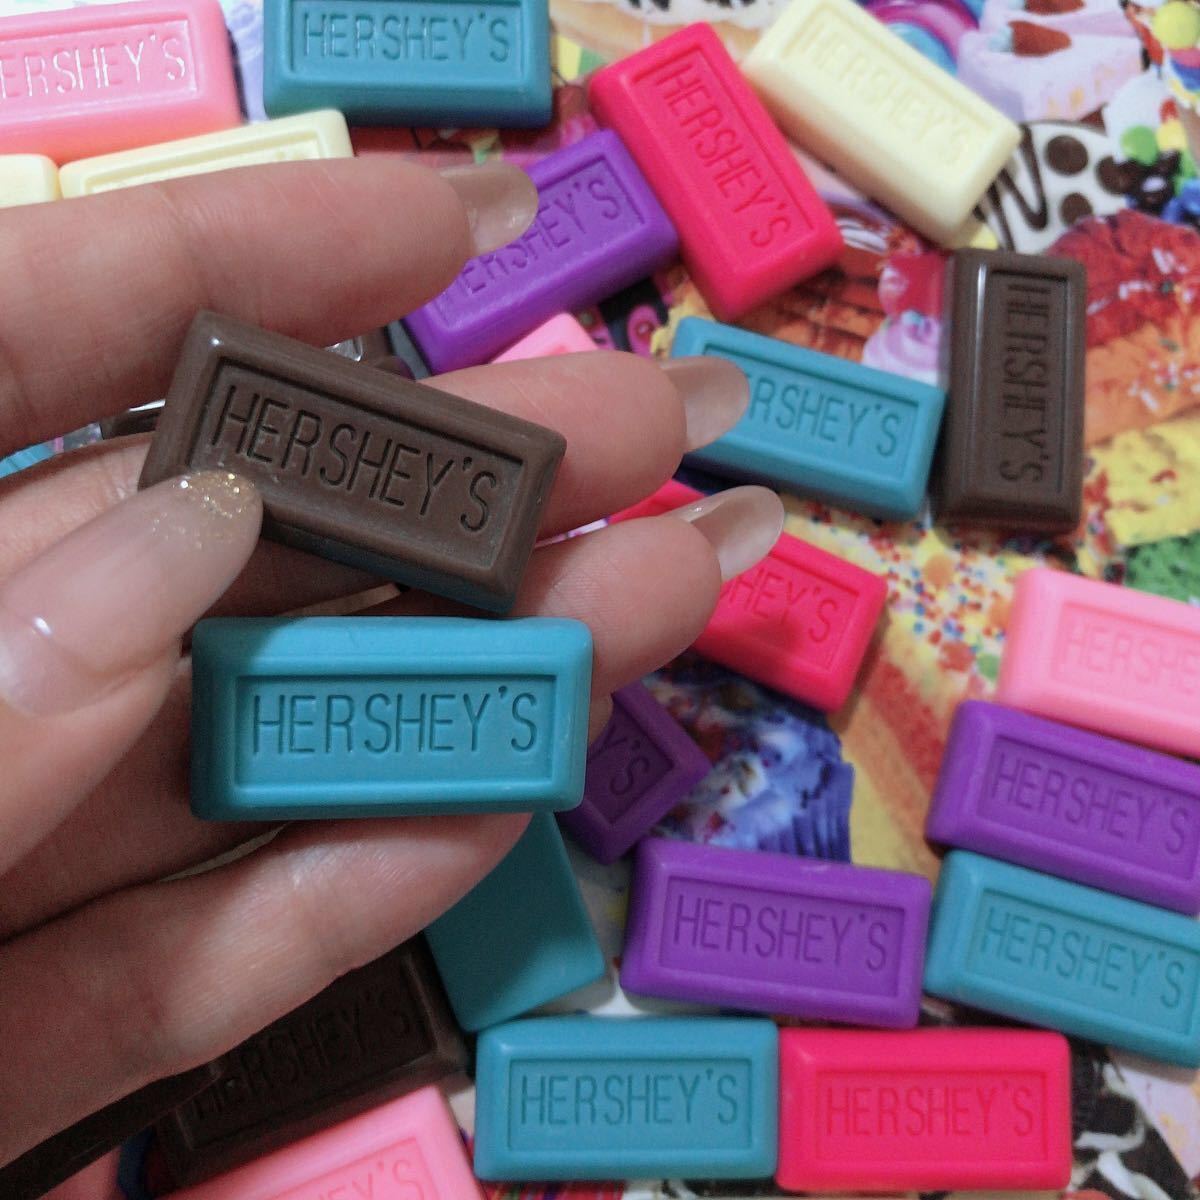 【soul'd out】デコパーツ HERSHEY'S チョコ お菓子 まとめ売り 20個